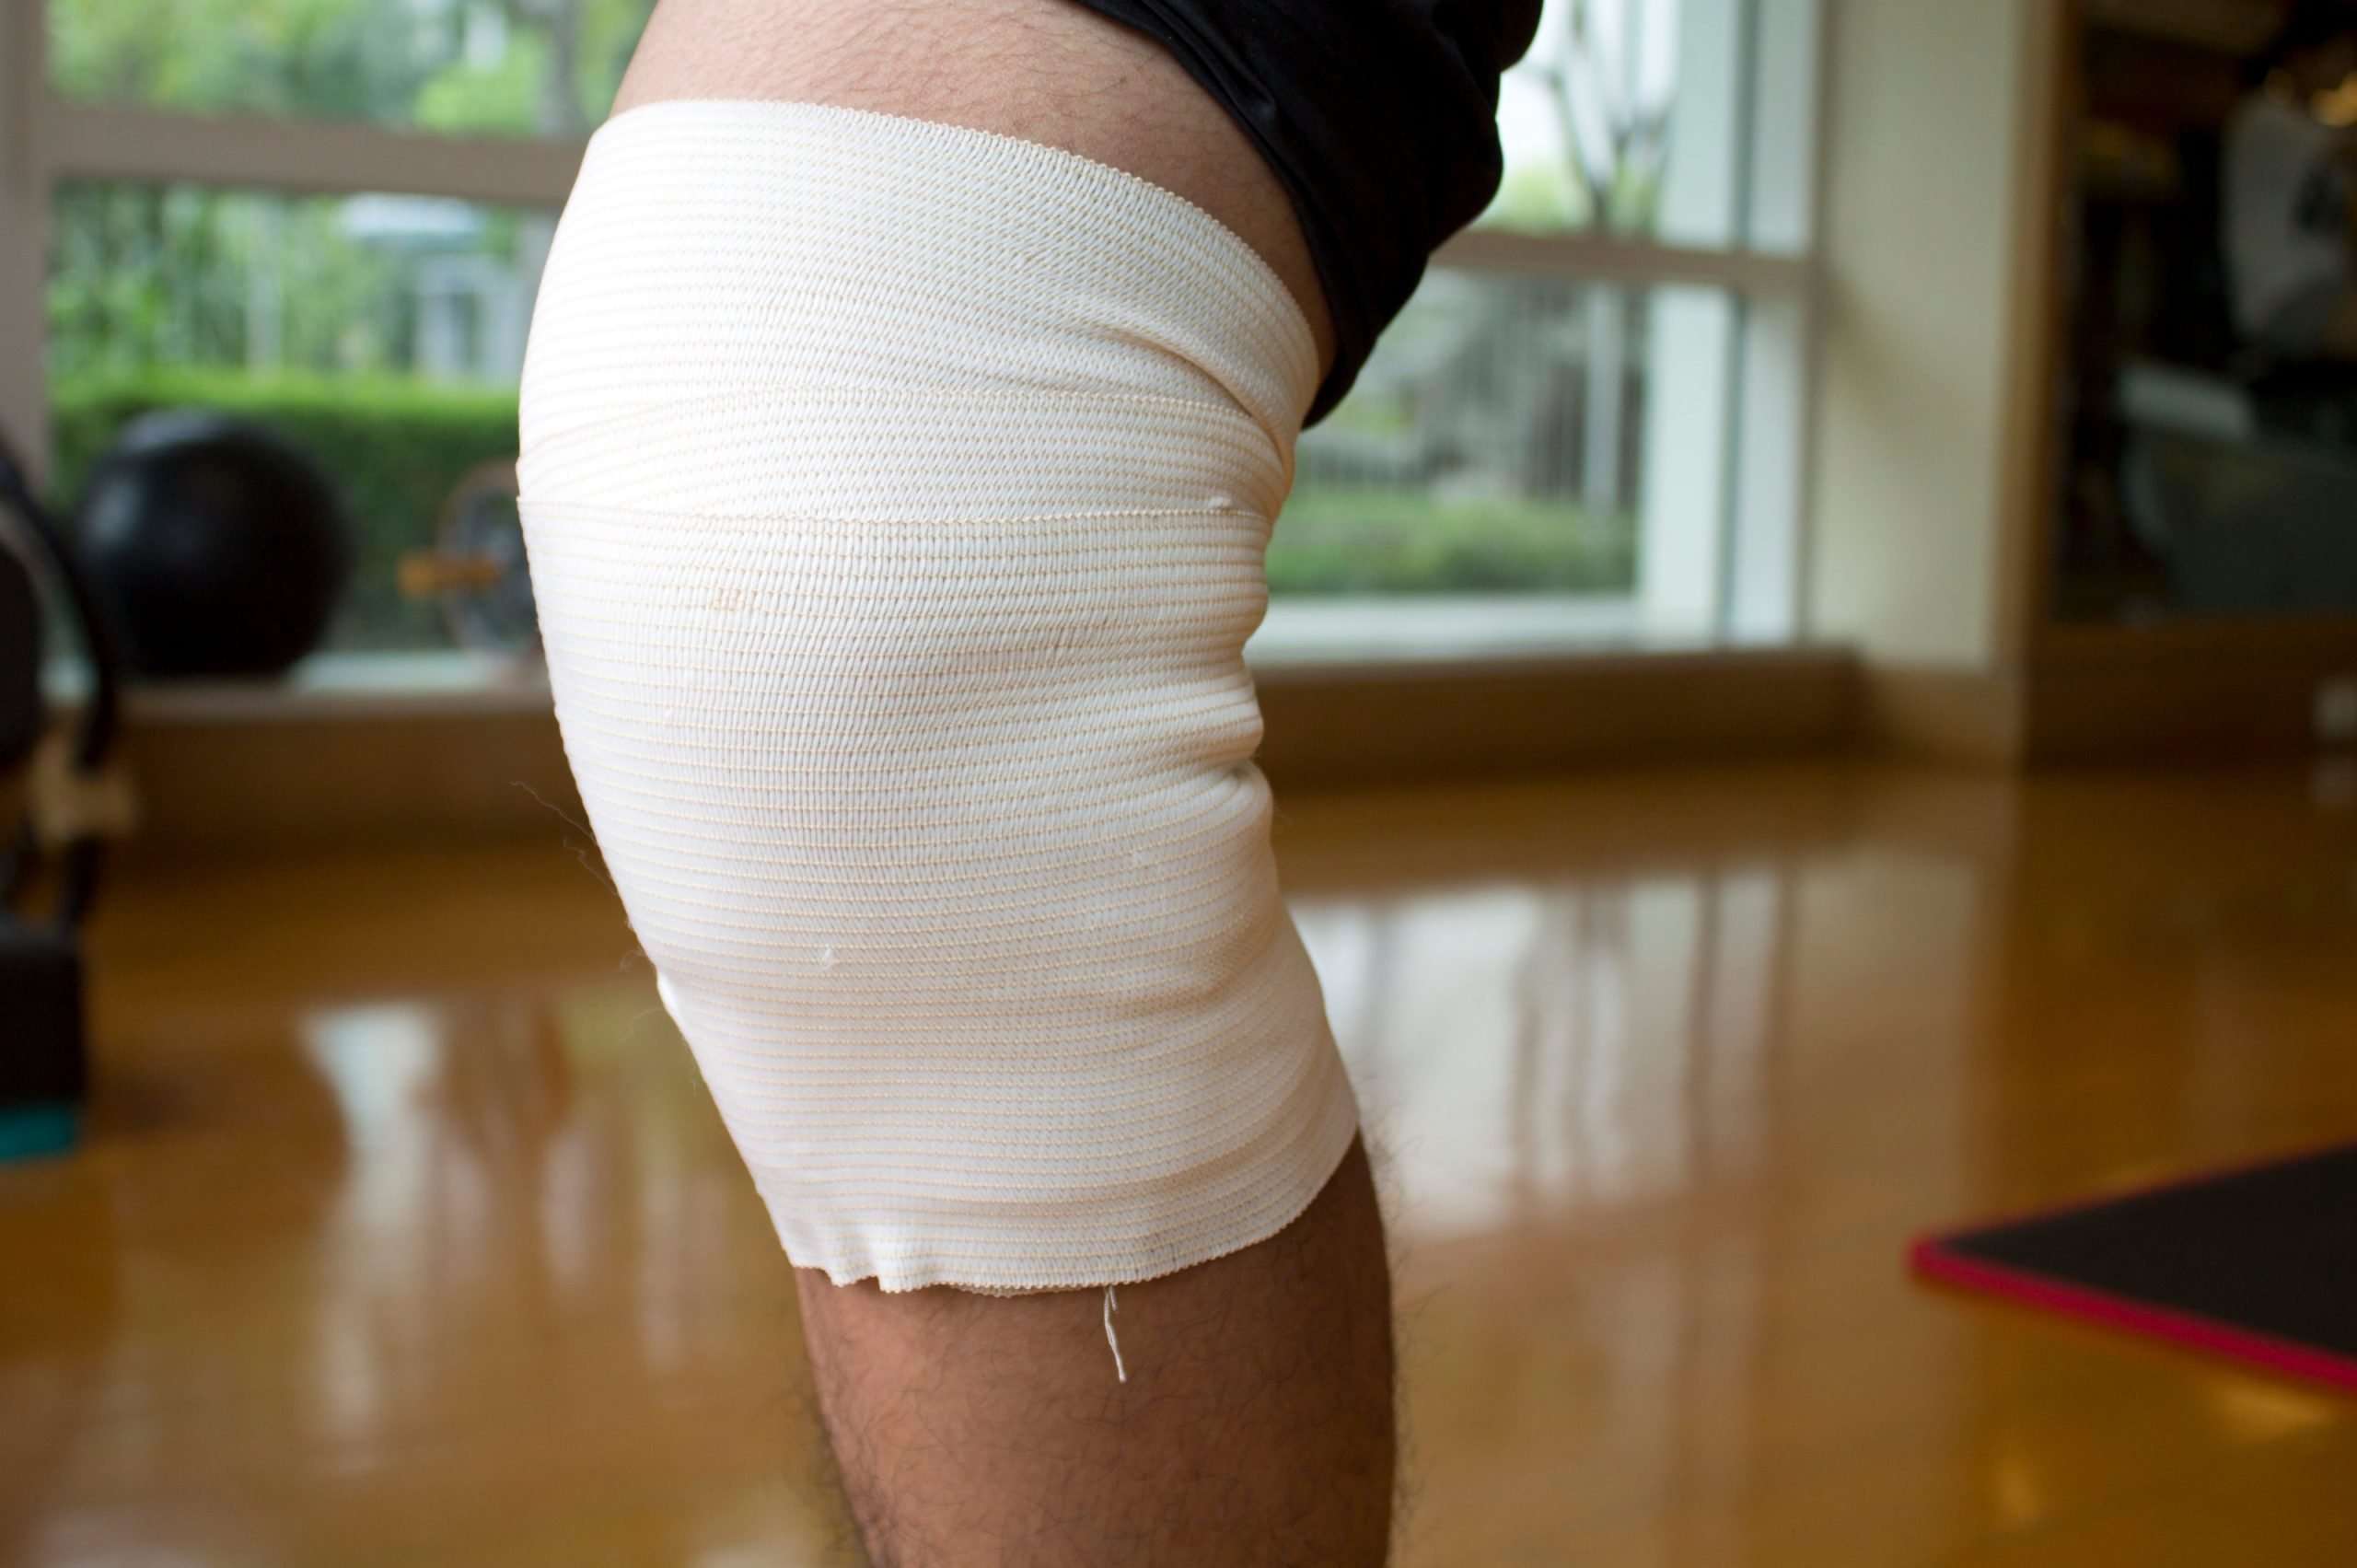 How to Wrap Your Knee: 9 Steps